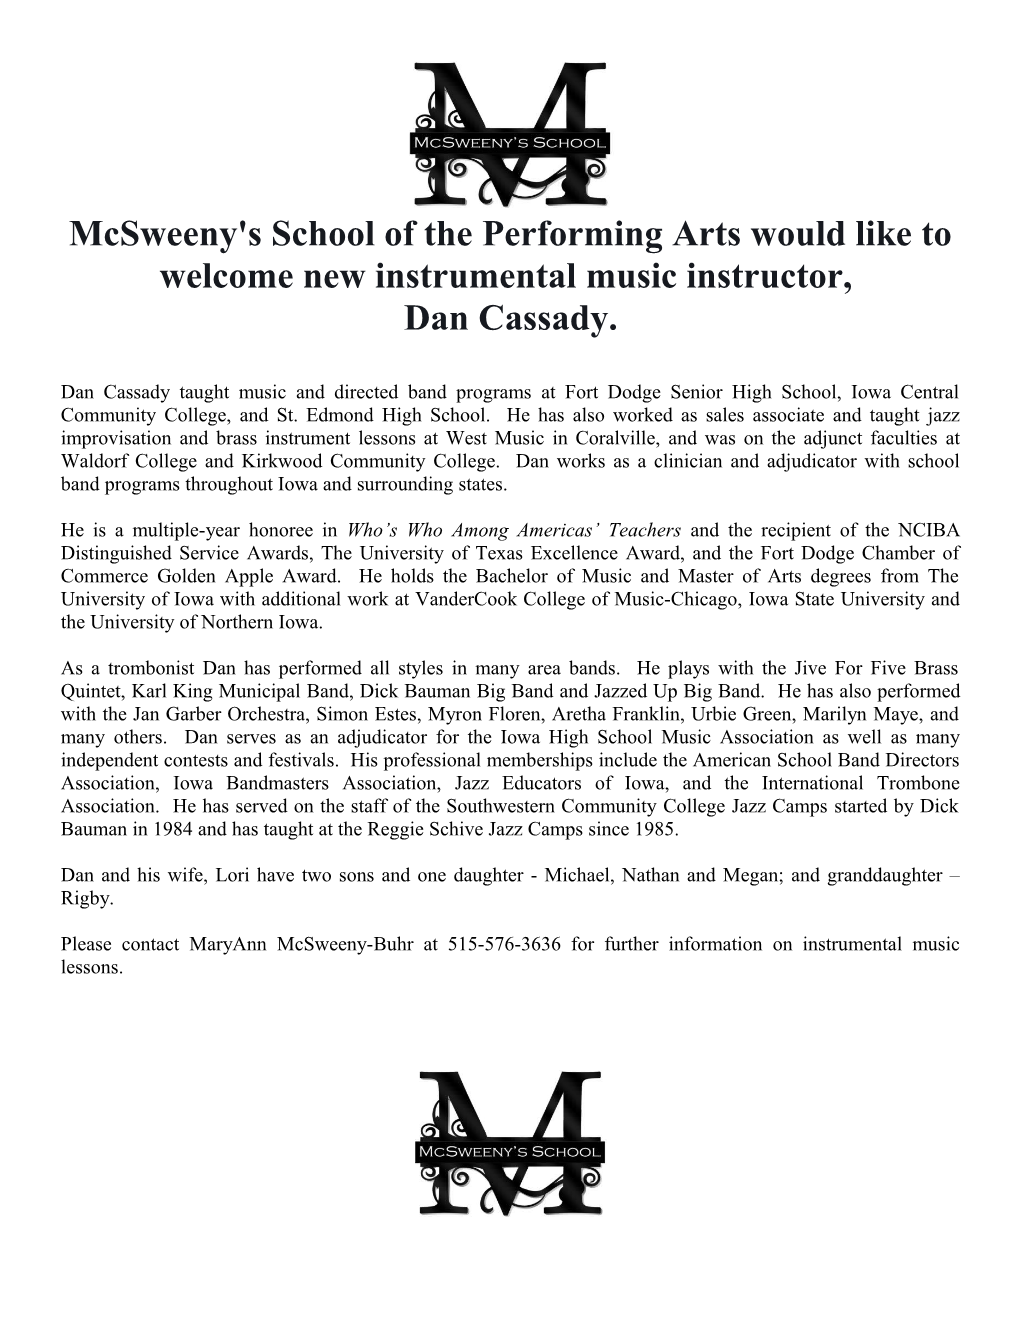 Mcsweeny's School of the Performing Arts Would Like to Welcome New Instrumental Music